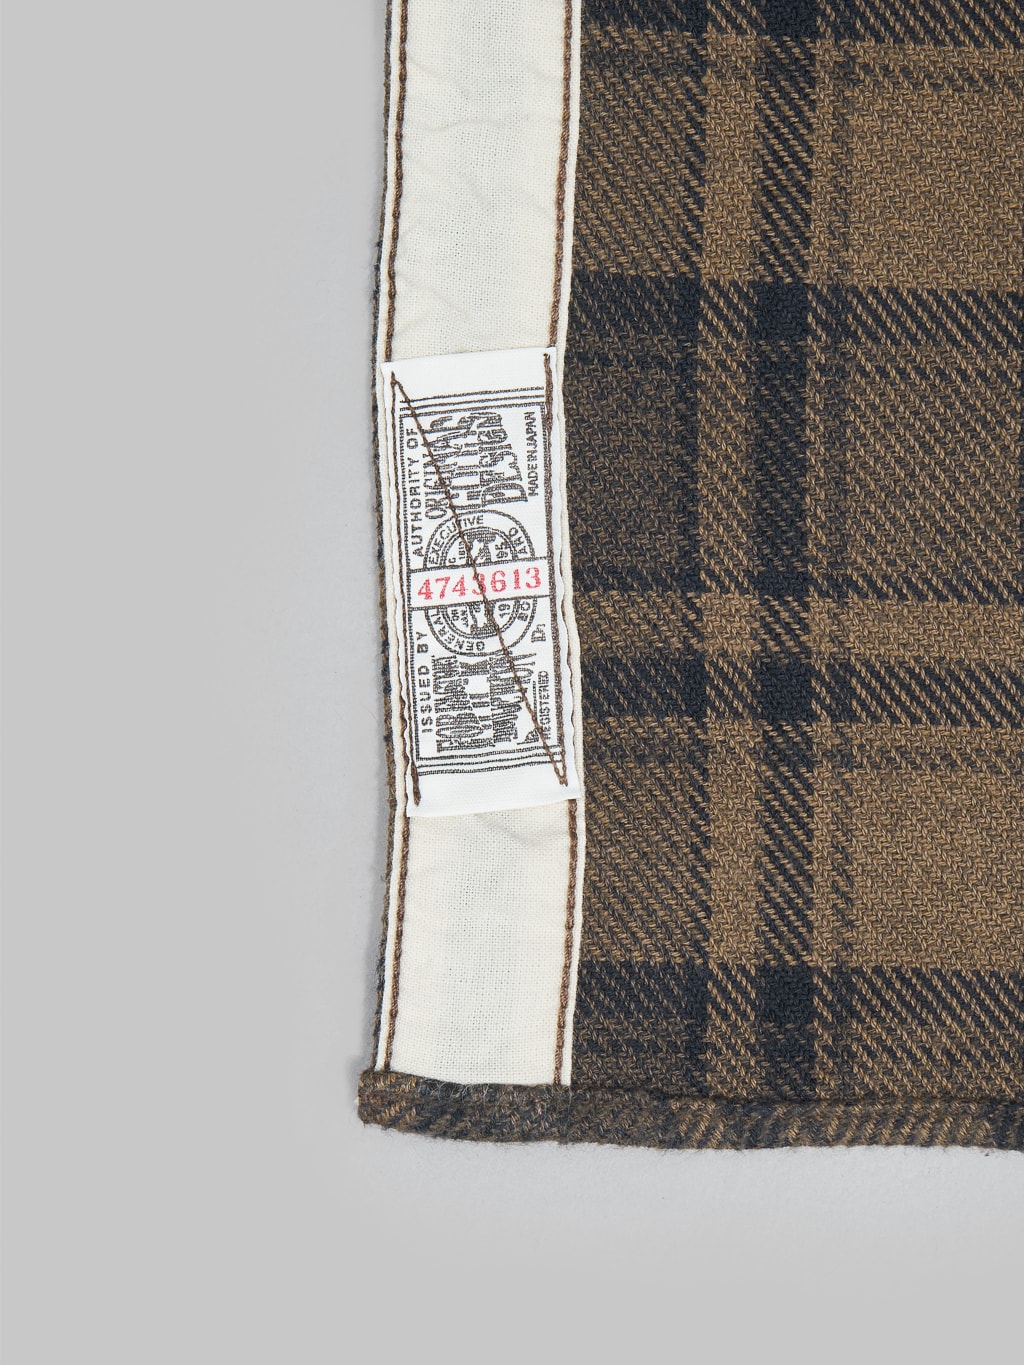 Fob Factory F3497 Nel Check Work flannel Shirt Brown interior